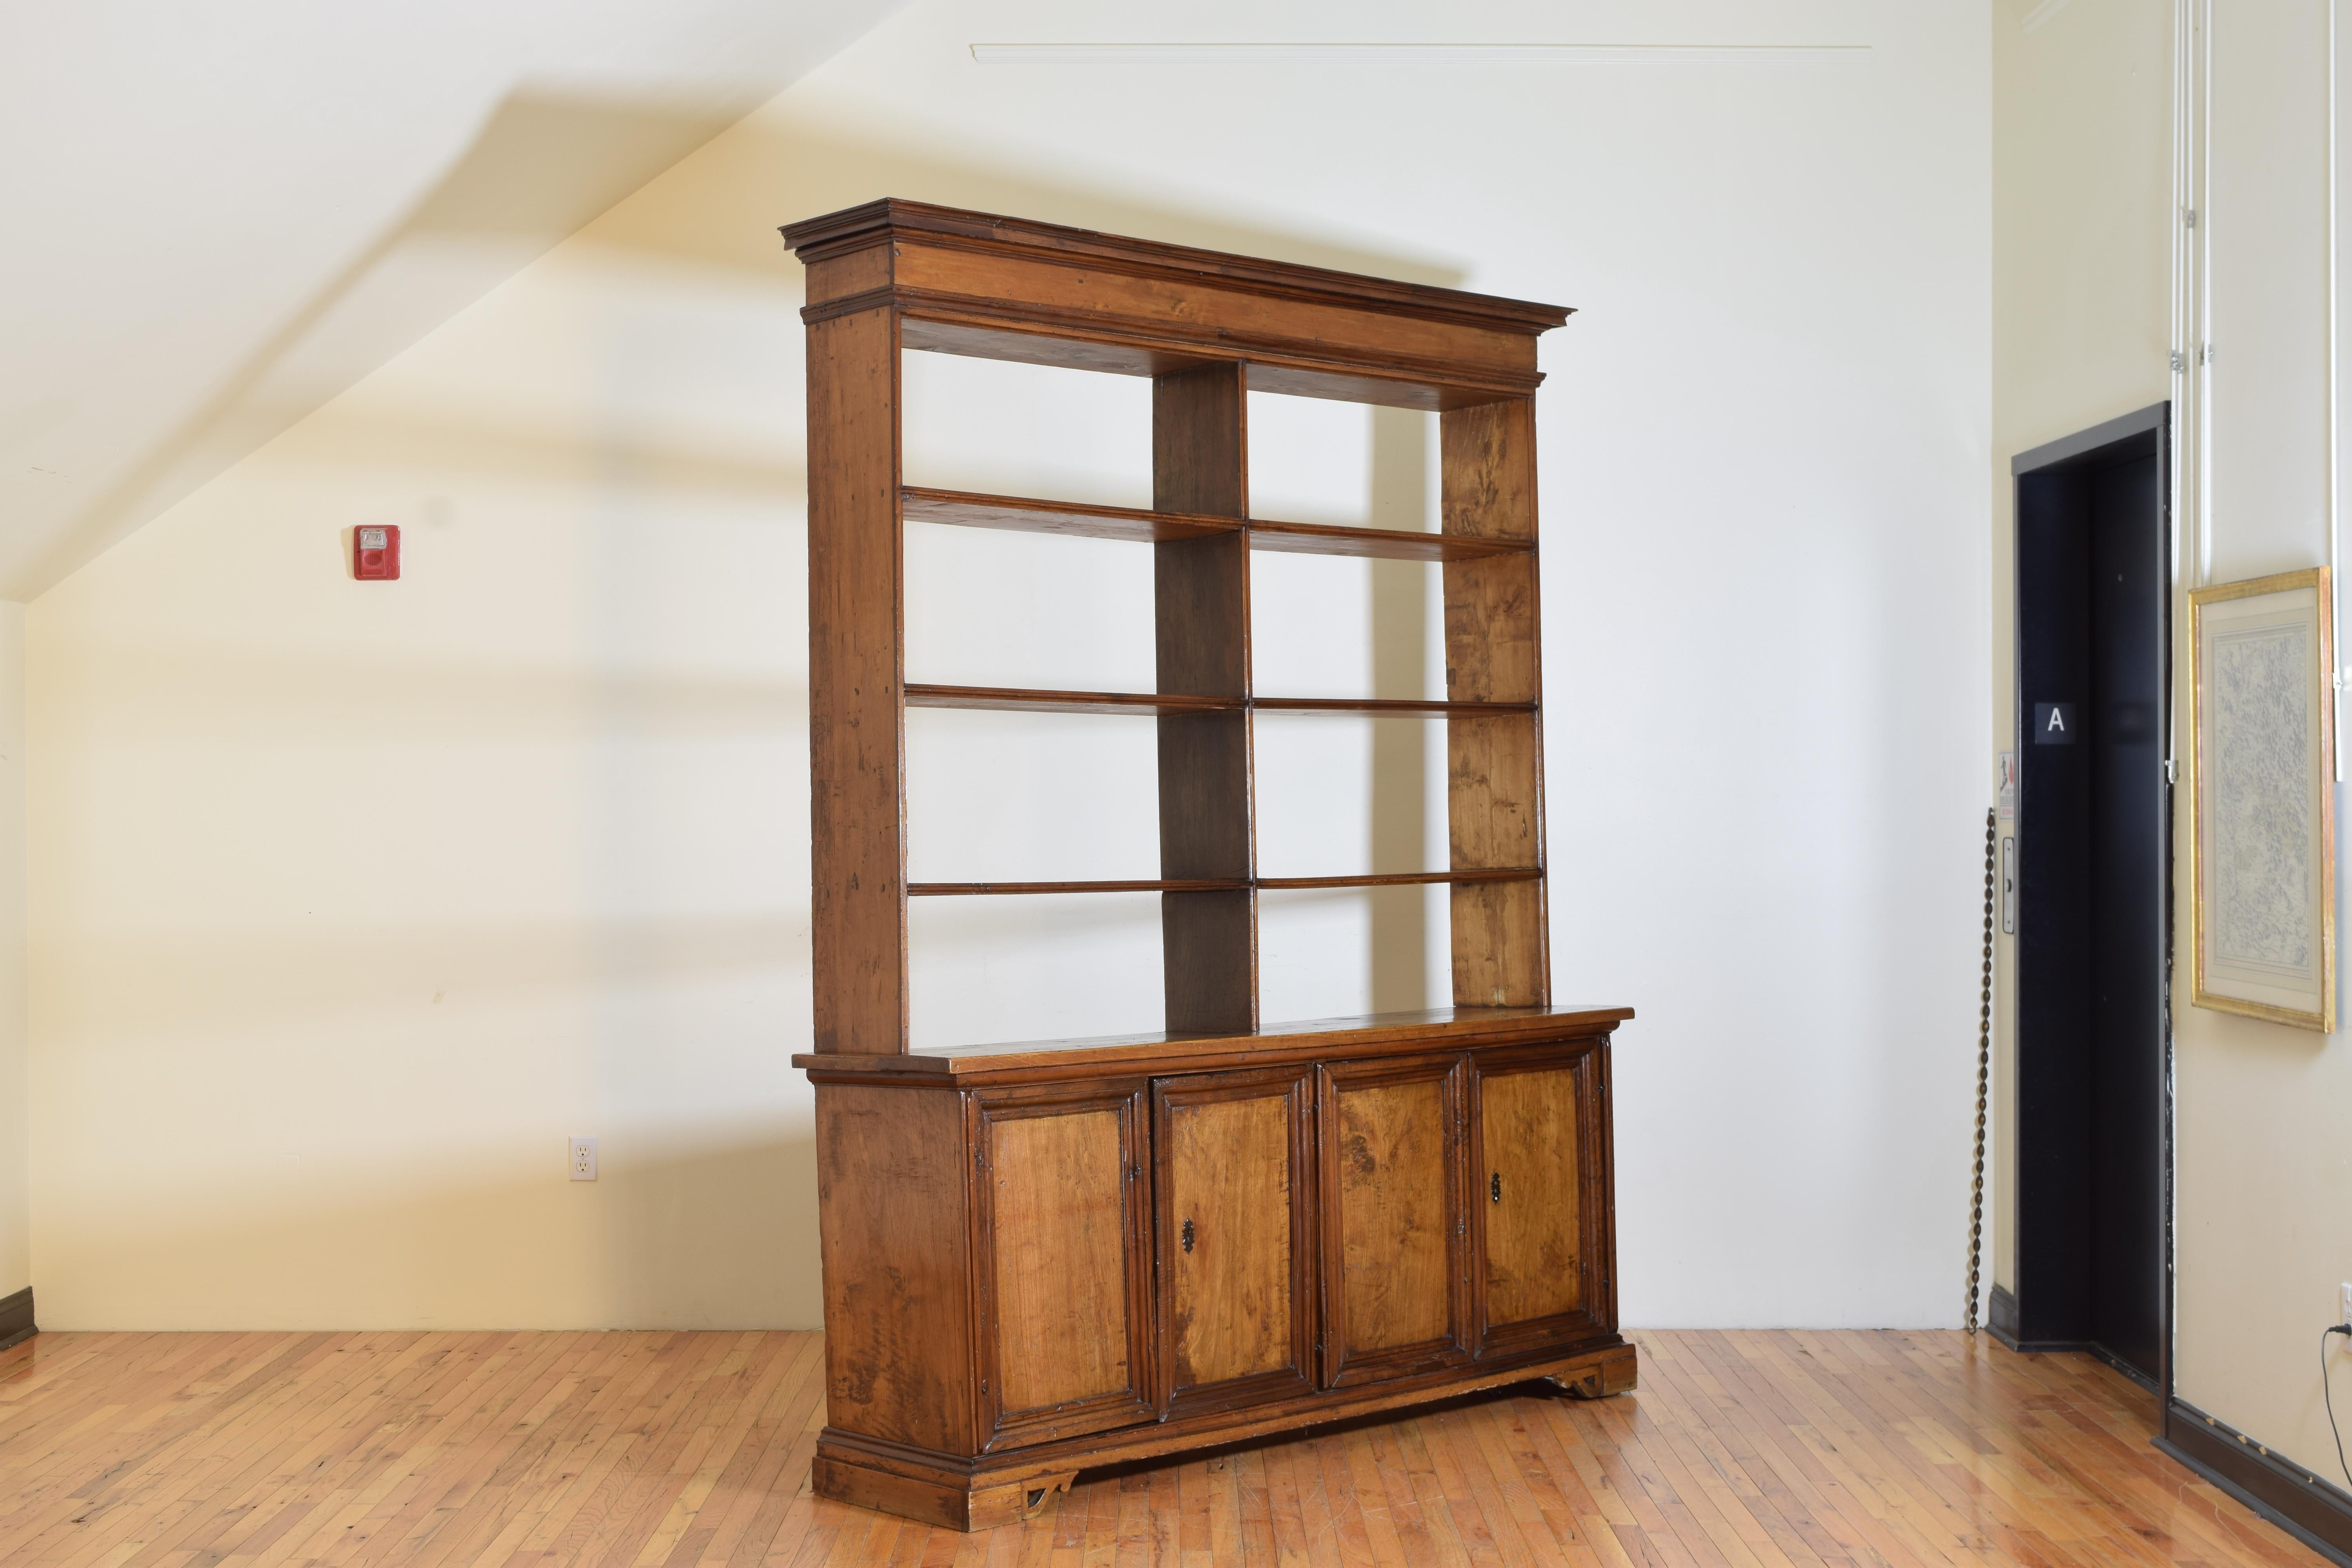 Having a stepped cornice and accompanying lower molding on the upper (later) bookcase section which houses 4 levels of shelves, the lower section is a credenza with four doors opening to reveal interior shelving, both sides with working locks,